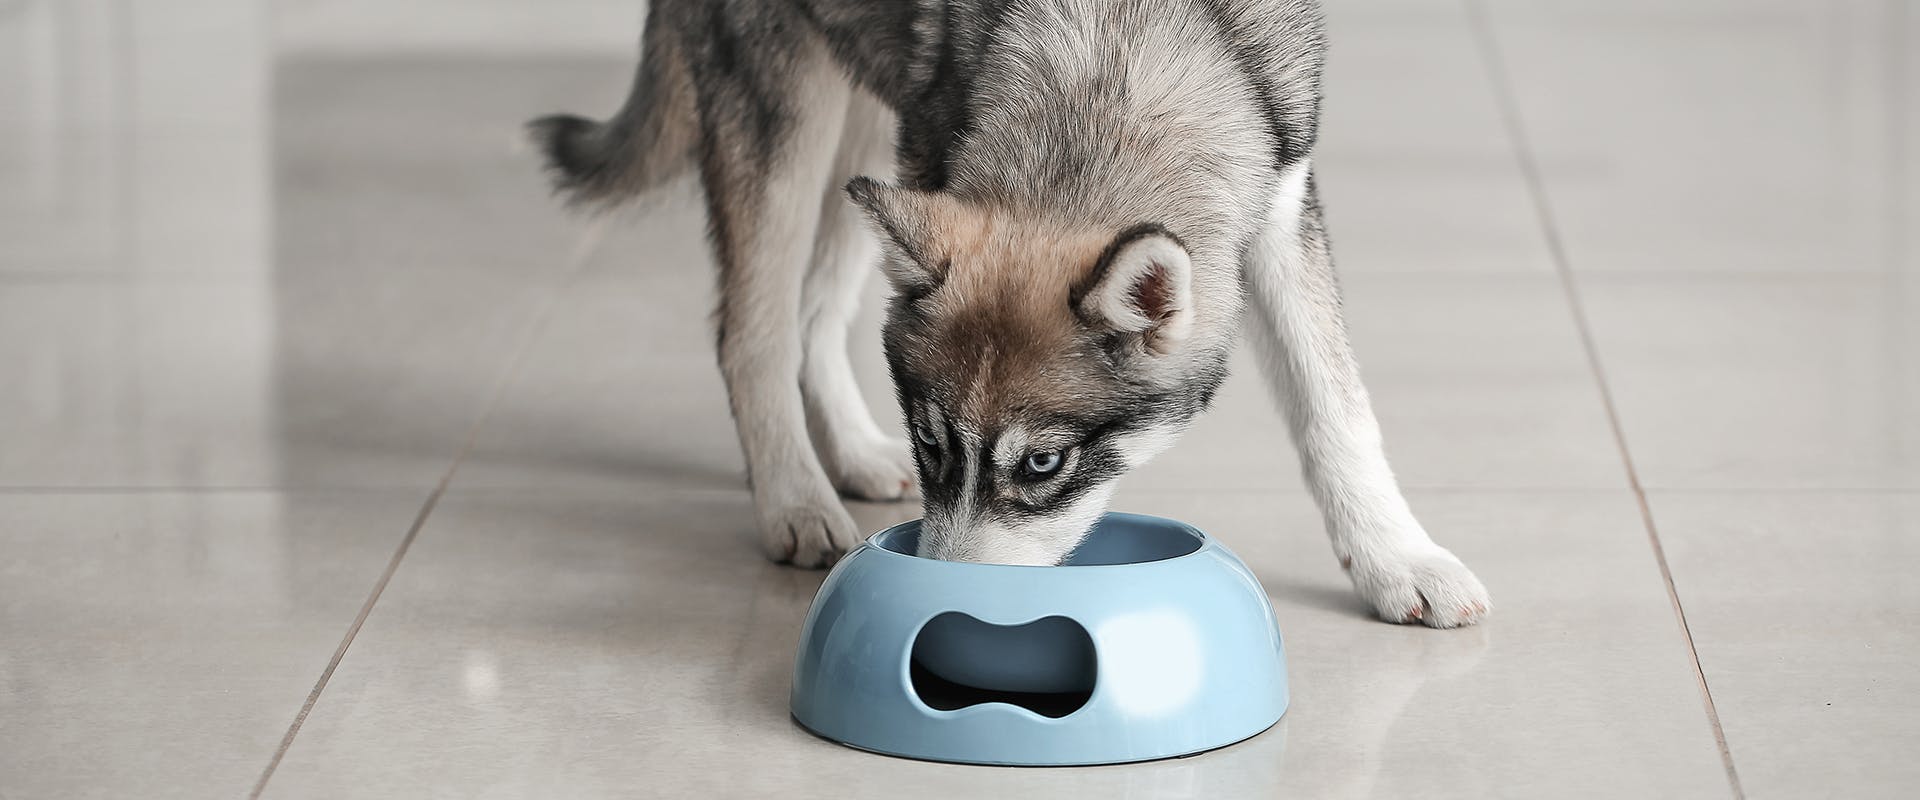 A dog eating from a blue dog bowl